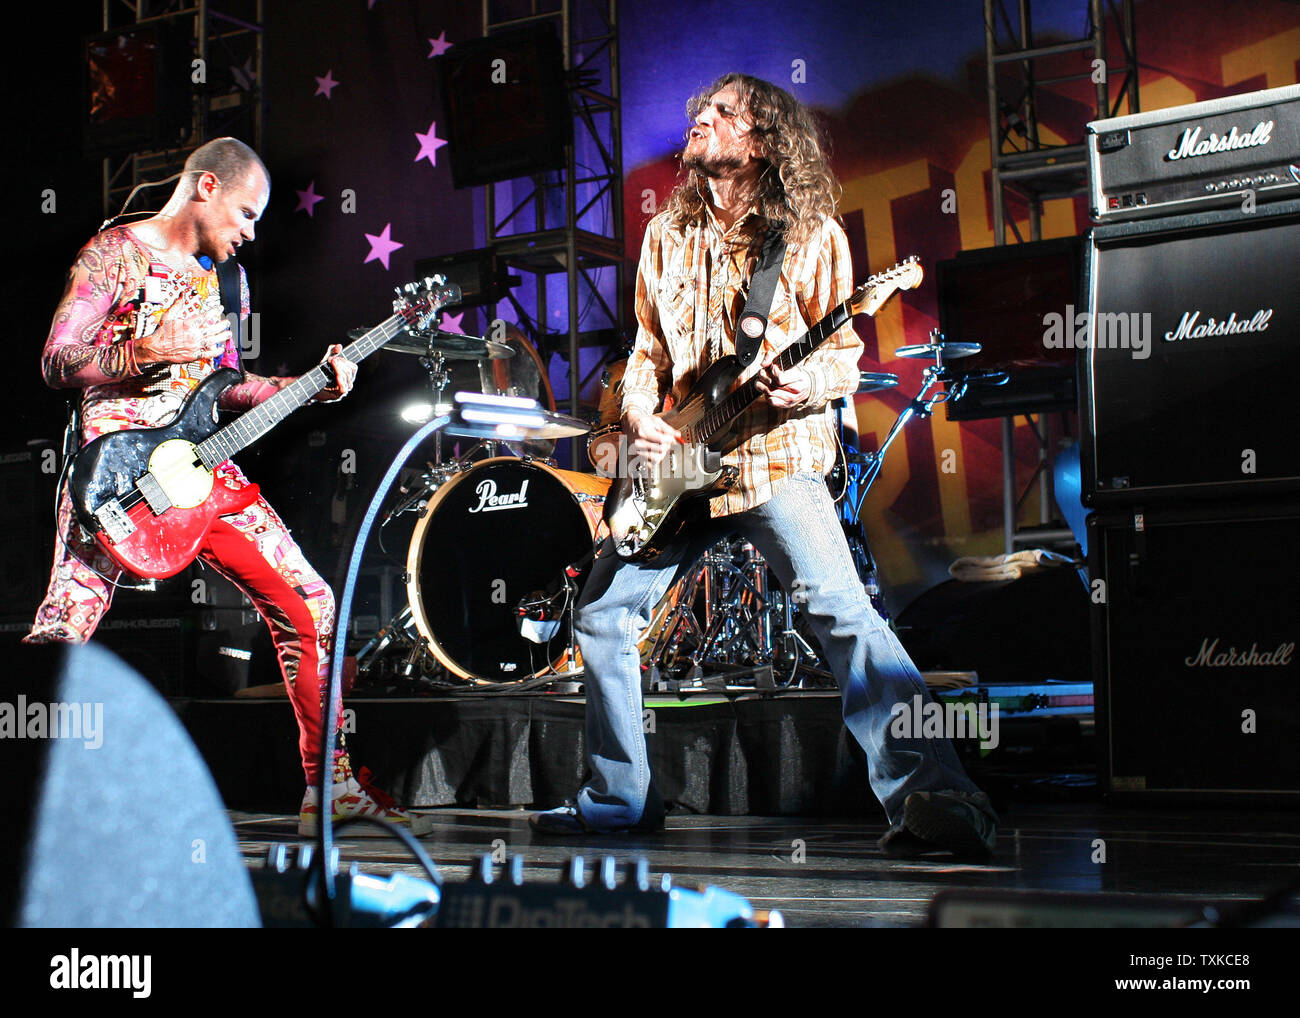 Red Hot Chili Peppers guitarists Flea (l) and John Frusciante (l) perform at the NASCAR NEXTEL Challenge at Lowe's Motor Speedway in Charlotte, NC on May 20, 2006.  (UPI Photo/Bob Carey) Stock Photo